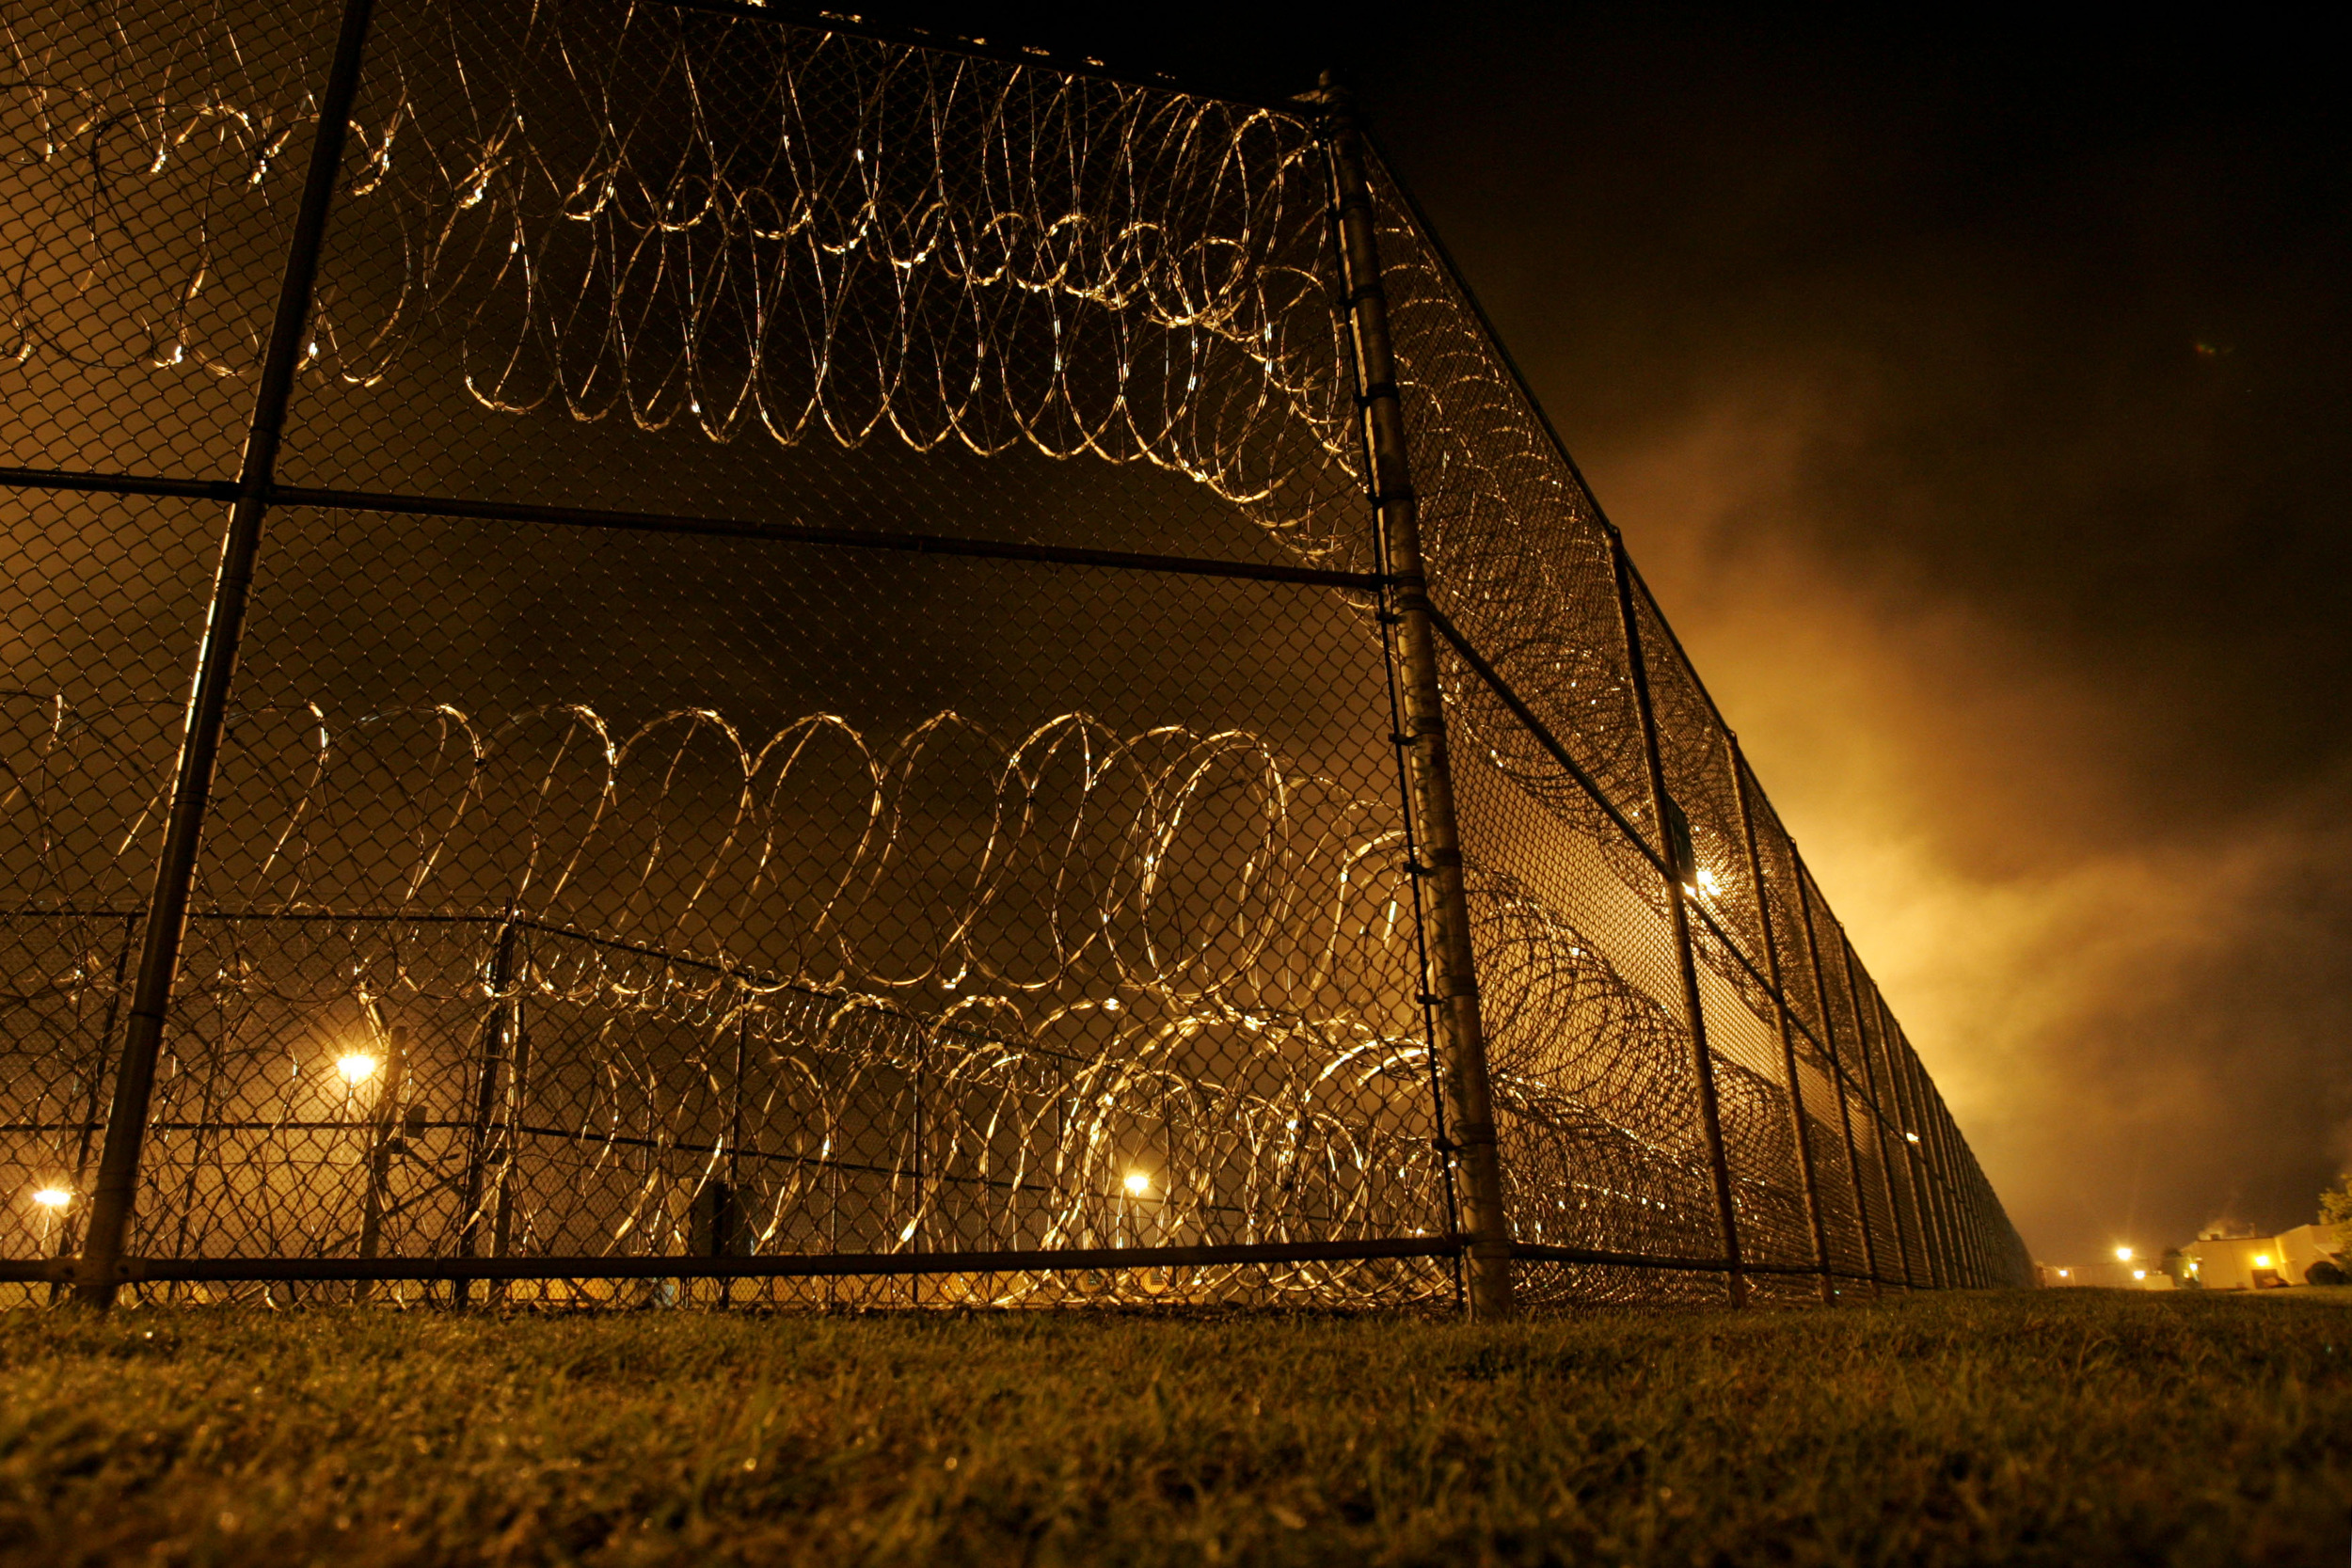  Fog rolls above the concertina wire at Riverbend Maximum Security Institution where Daryl Holton is executed at 1 a.m. Wednesday, September 12, 2007 in Nashville, Tenn.  